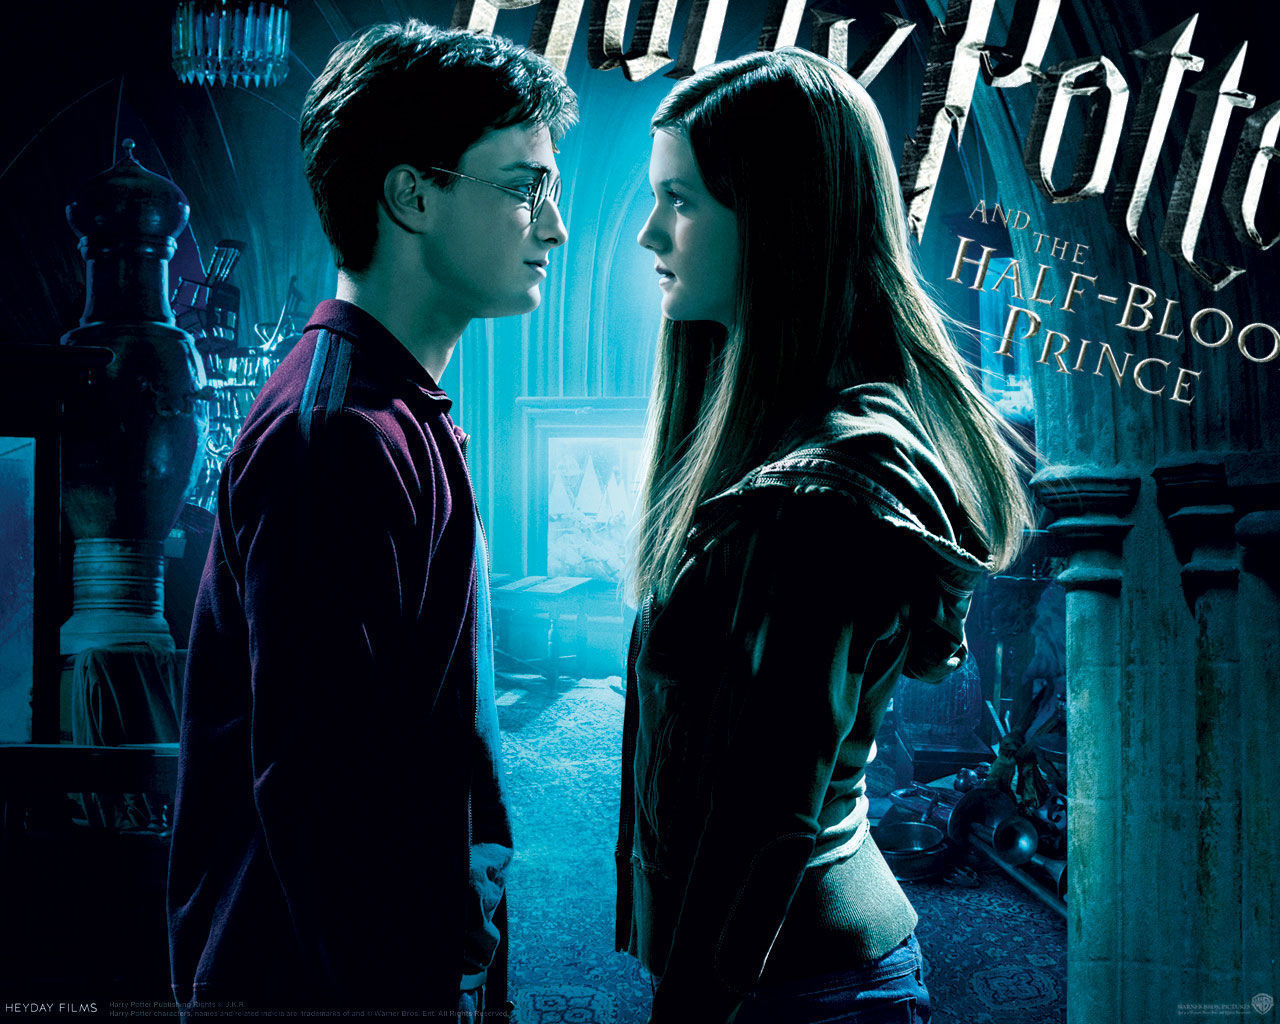 Harry Potter And The Half-Blood Prince - The Half - Blood Prince